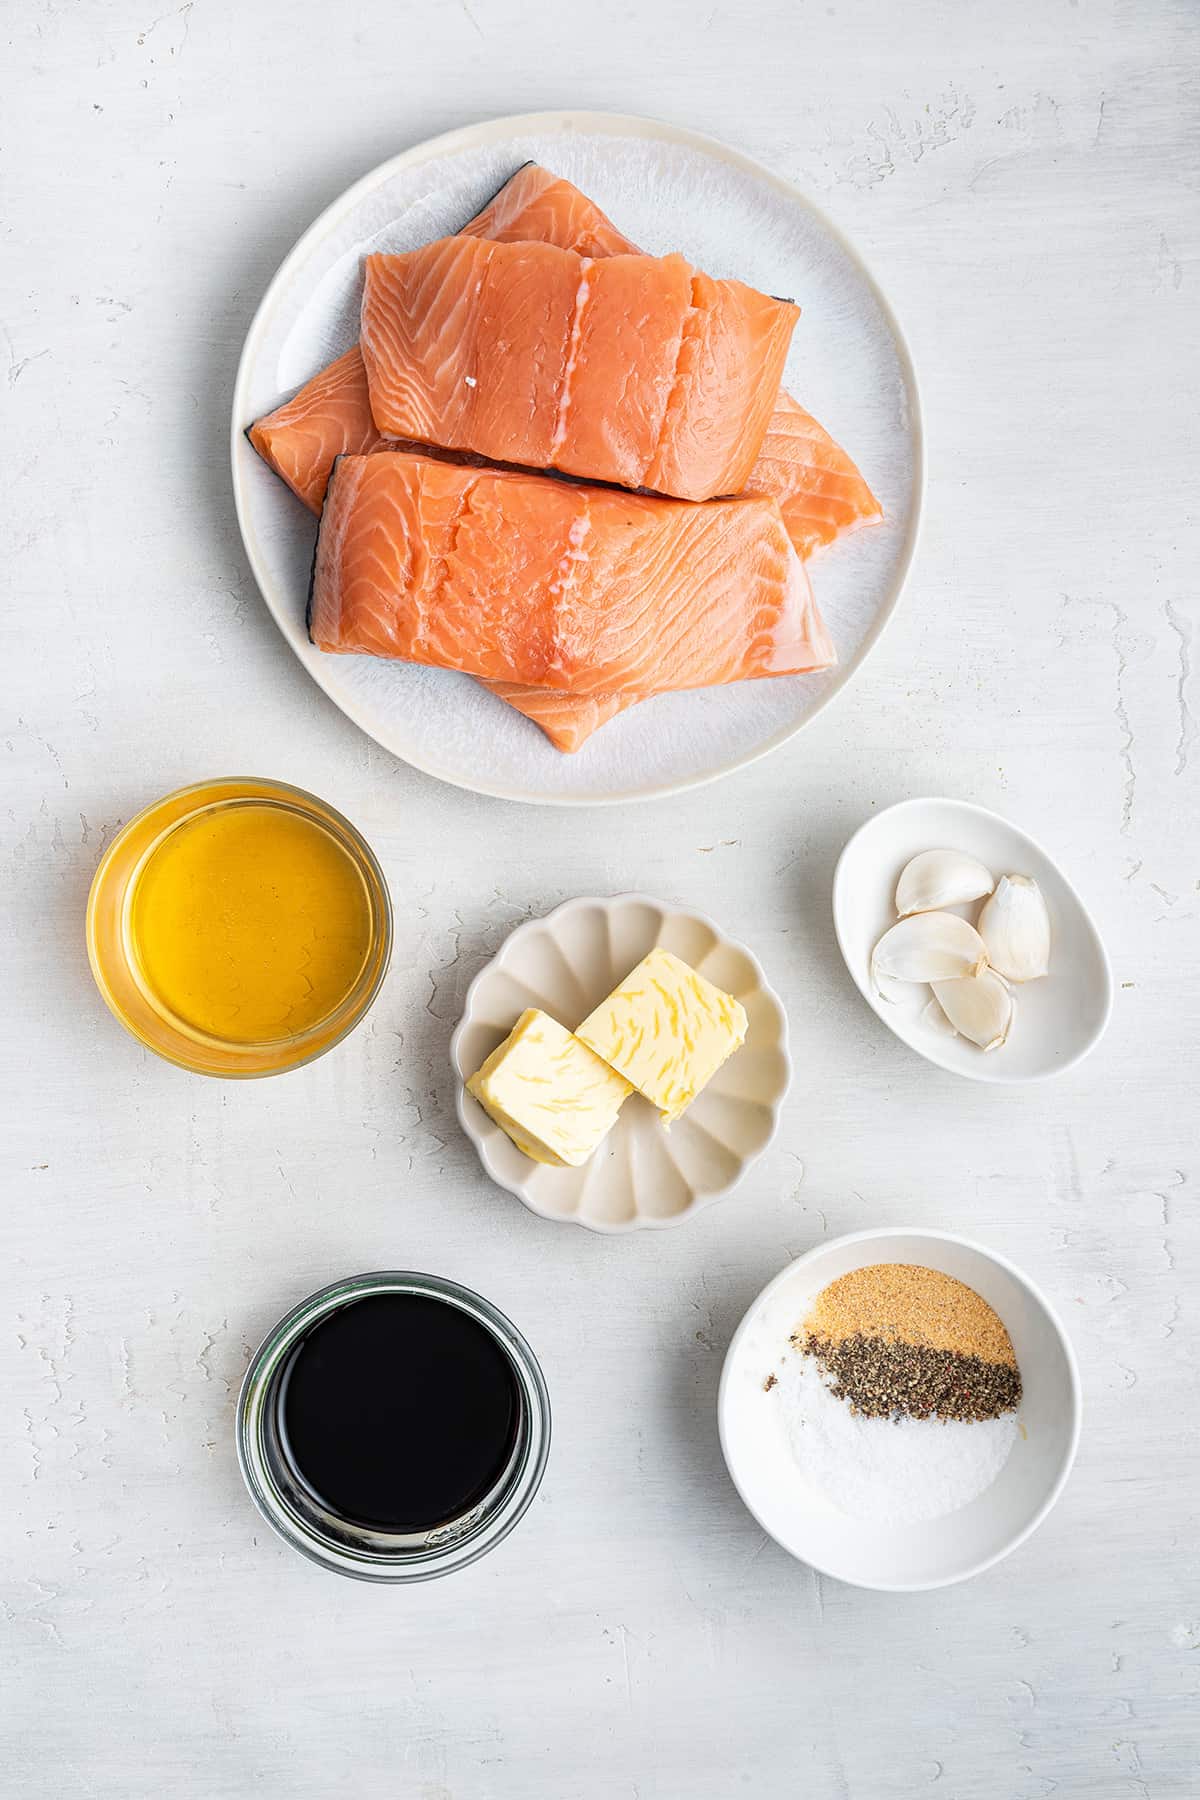 Overhead view of the ingredients needed for honey glazed salmon: a plate of salmon filets, a bowl of soy sauce, a bowl of garlic, a bowl of butter, a bowl of honey, and a bowl of salt, pepper, and garlic powder